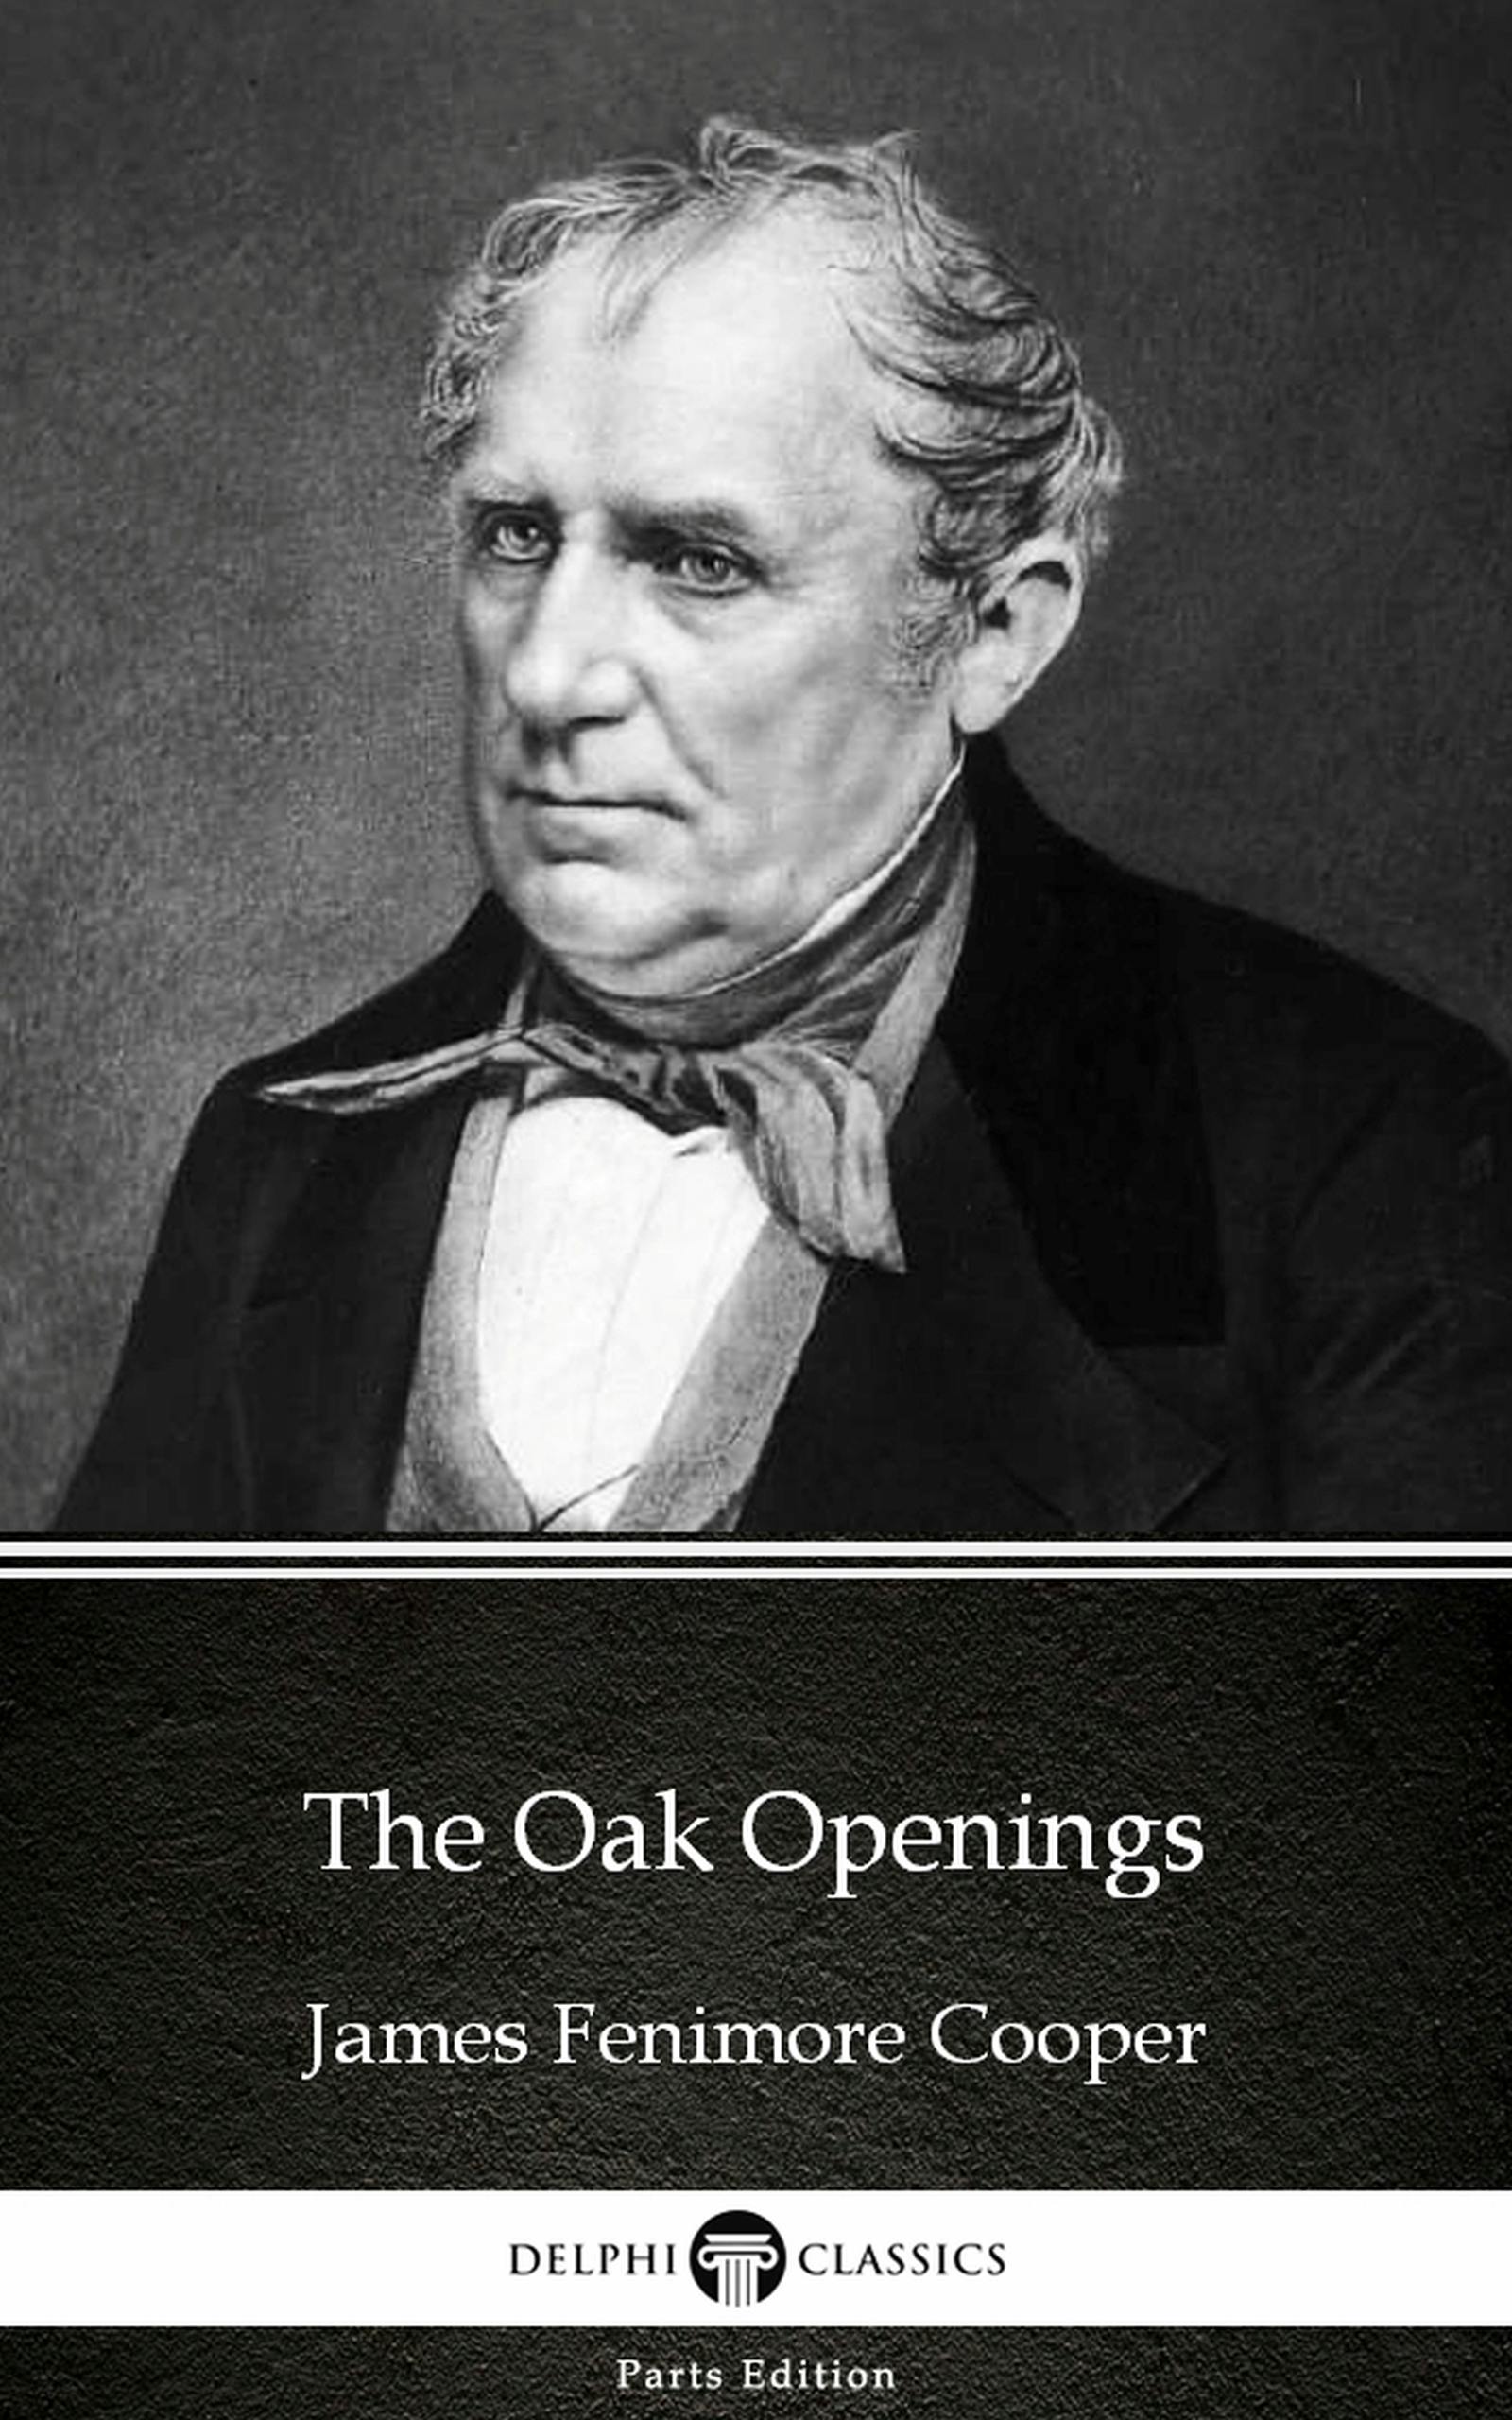 The Oak Openings by James Fenimore Cooper - Delphi Classics (Illustrated) - James Fenimore Cooper